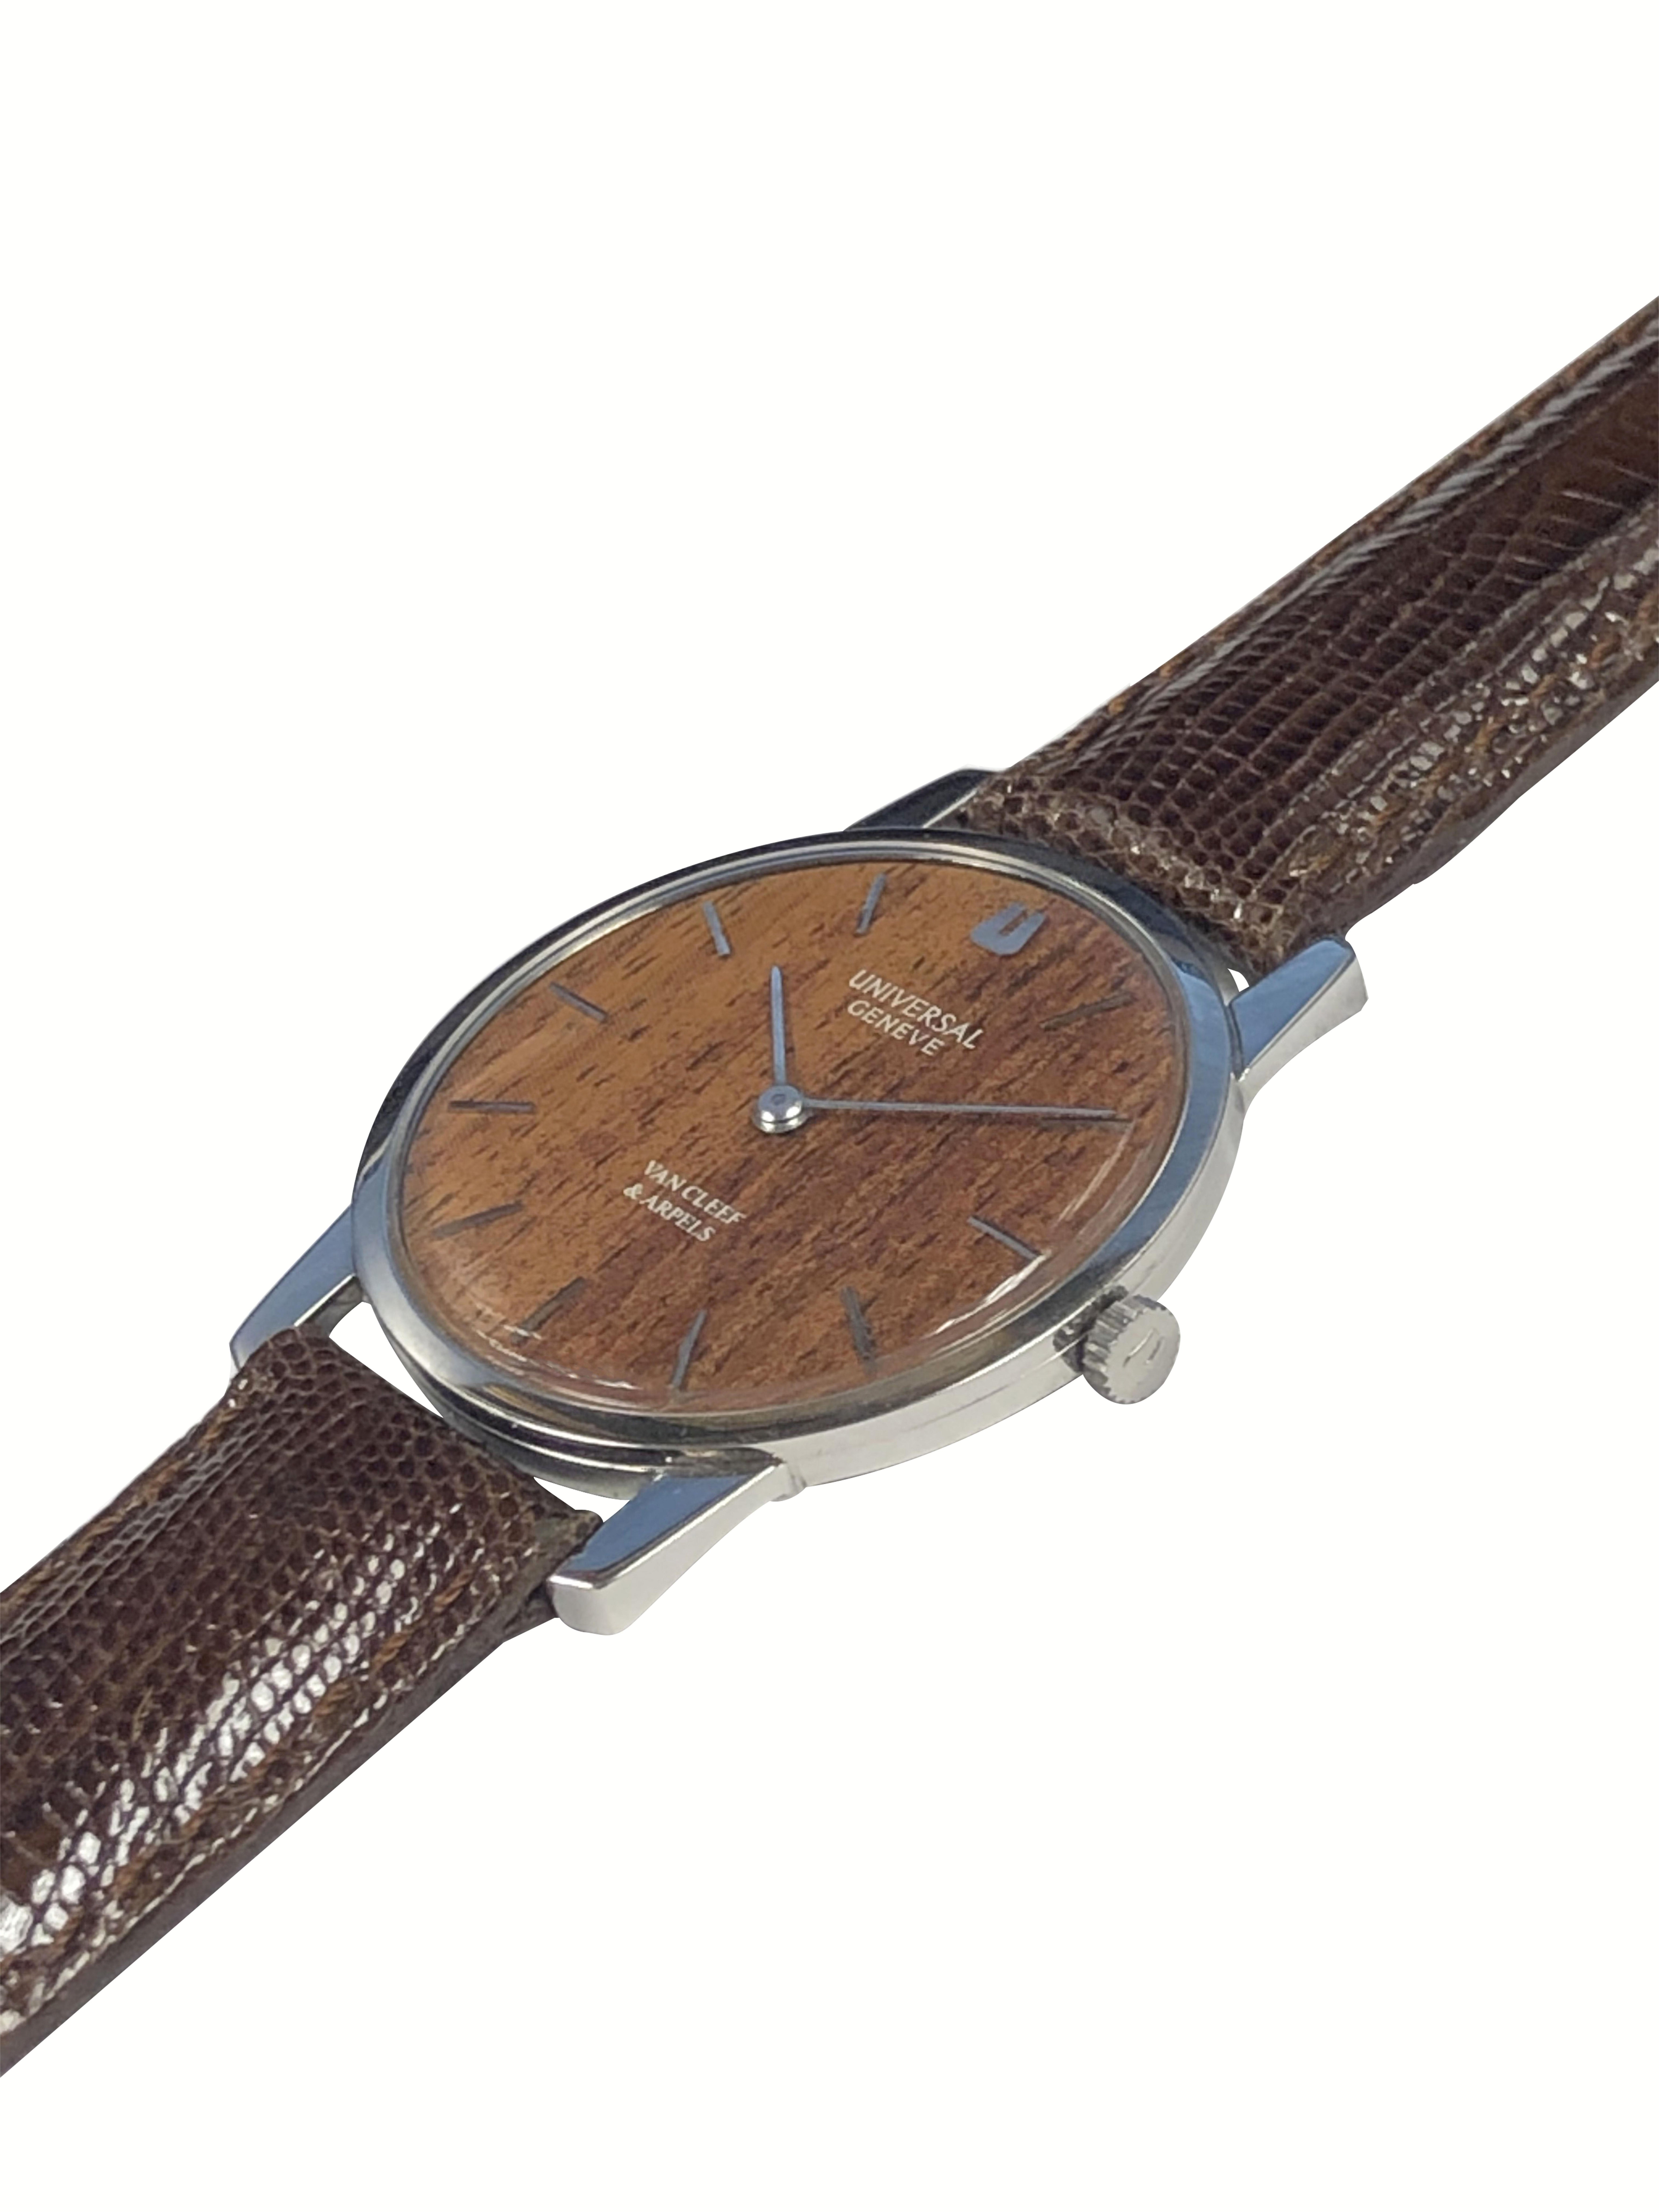 Circa 1970s Universal Geneve Retailed by Van Cleef & Arpels Rare Wood Dial Wrist Watch, 31 MM Diameter 3 piece Stainless Steel Case, 6 MM thick. 17 Jewel Mechanical, manual wind movement. Fitted with a Wood Dial and having raised Markers. New Hirsch